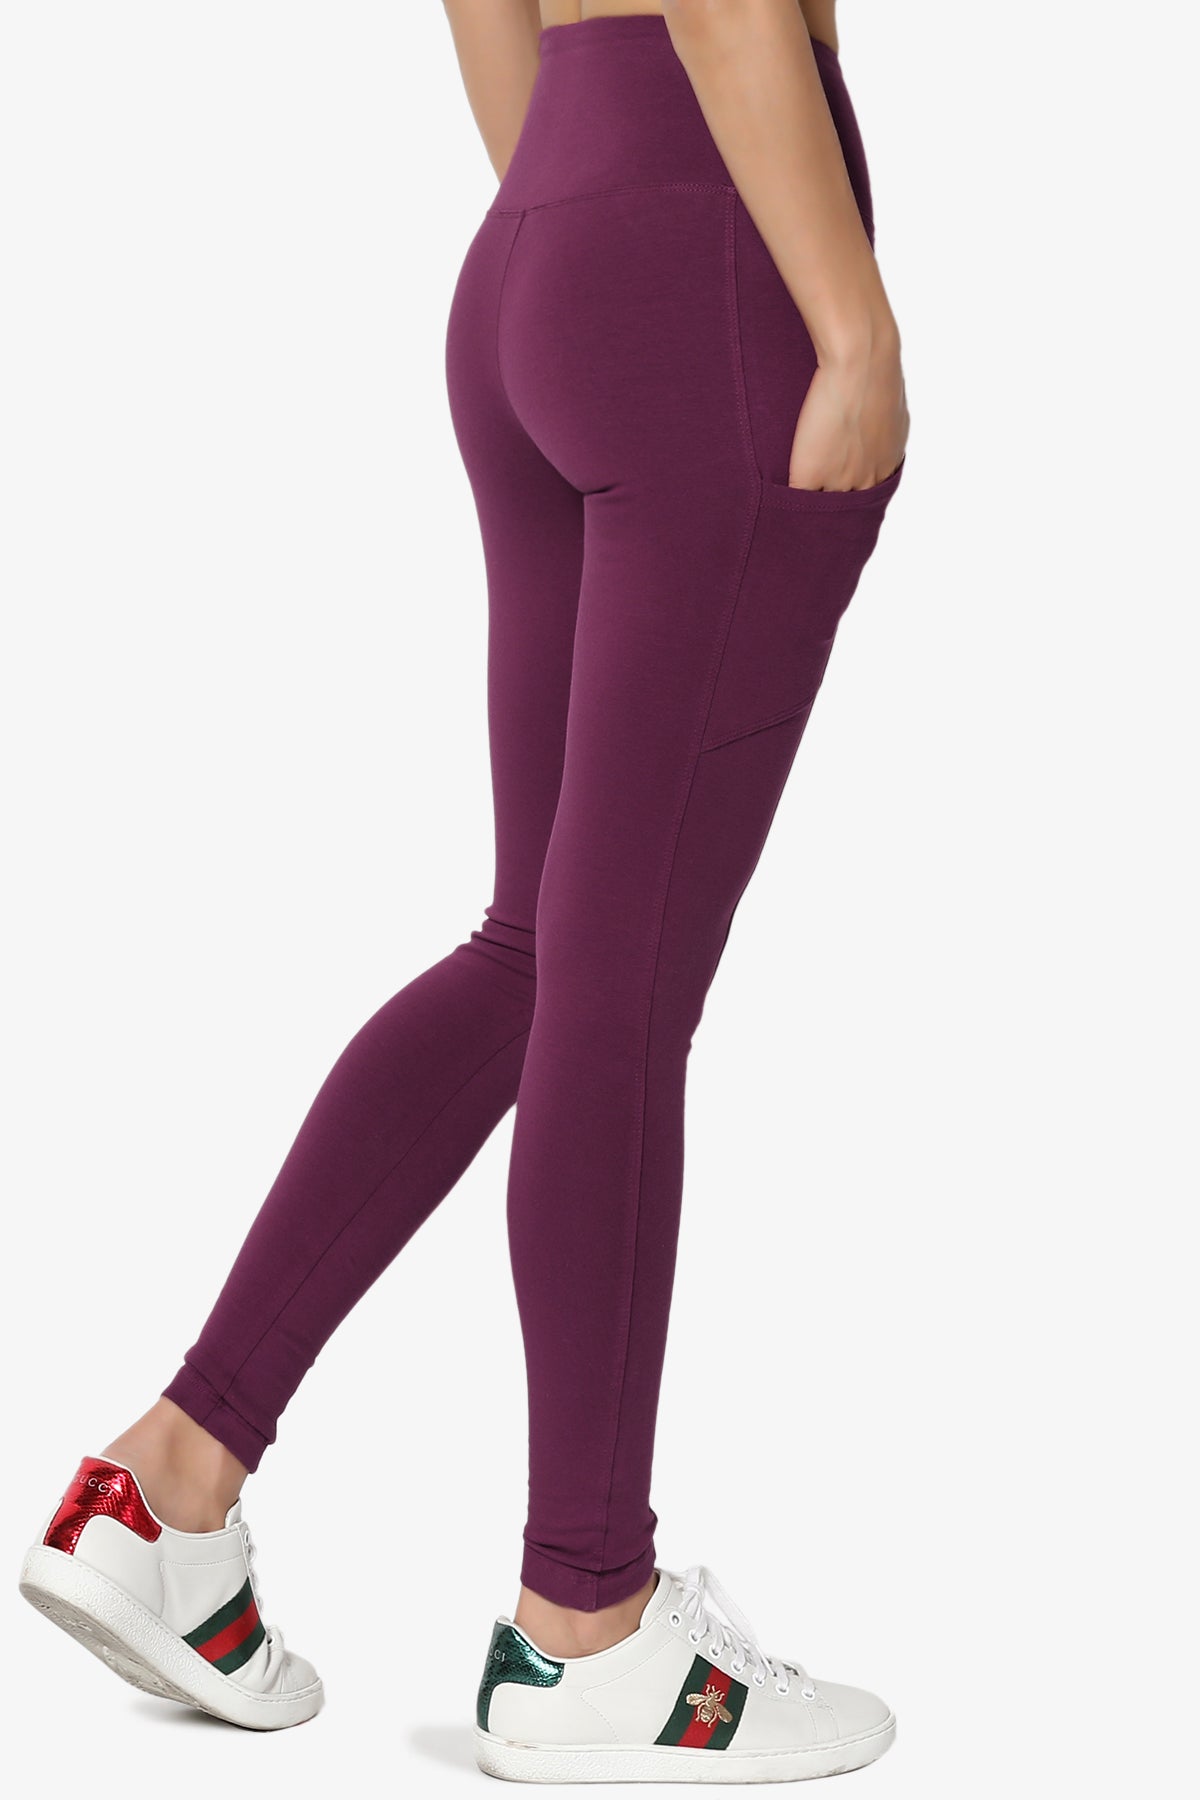 Ansley Luxe Cotton Leggings with Pockets DARK PLUM_4